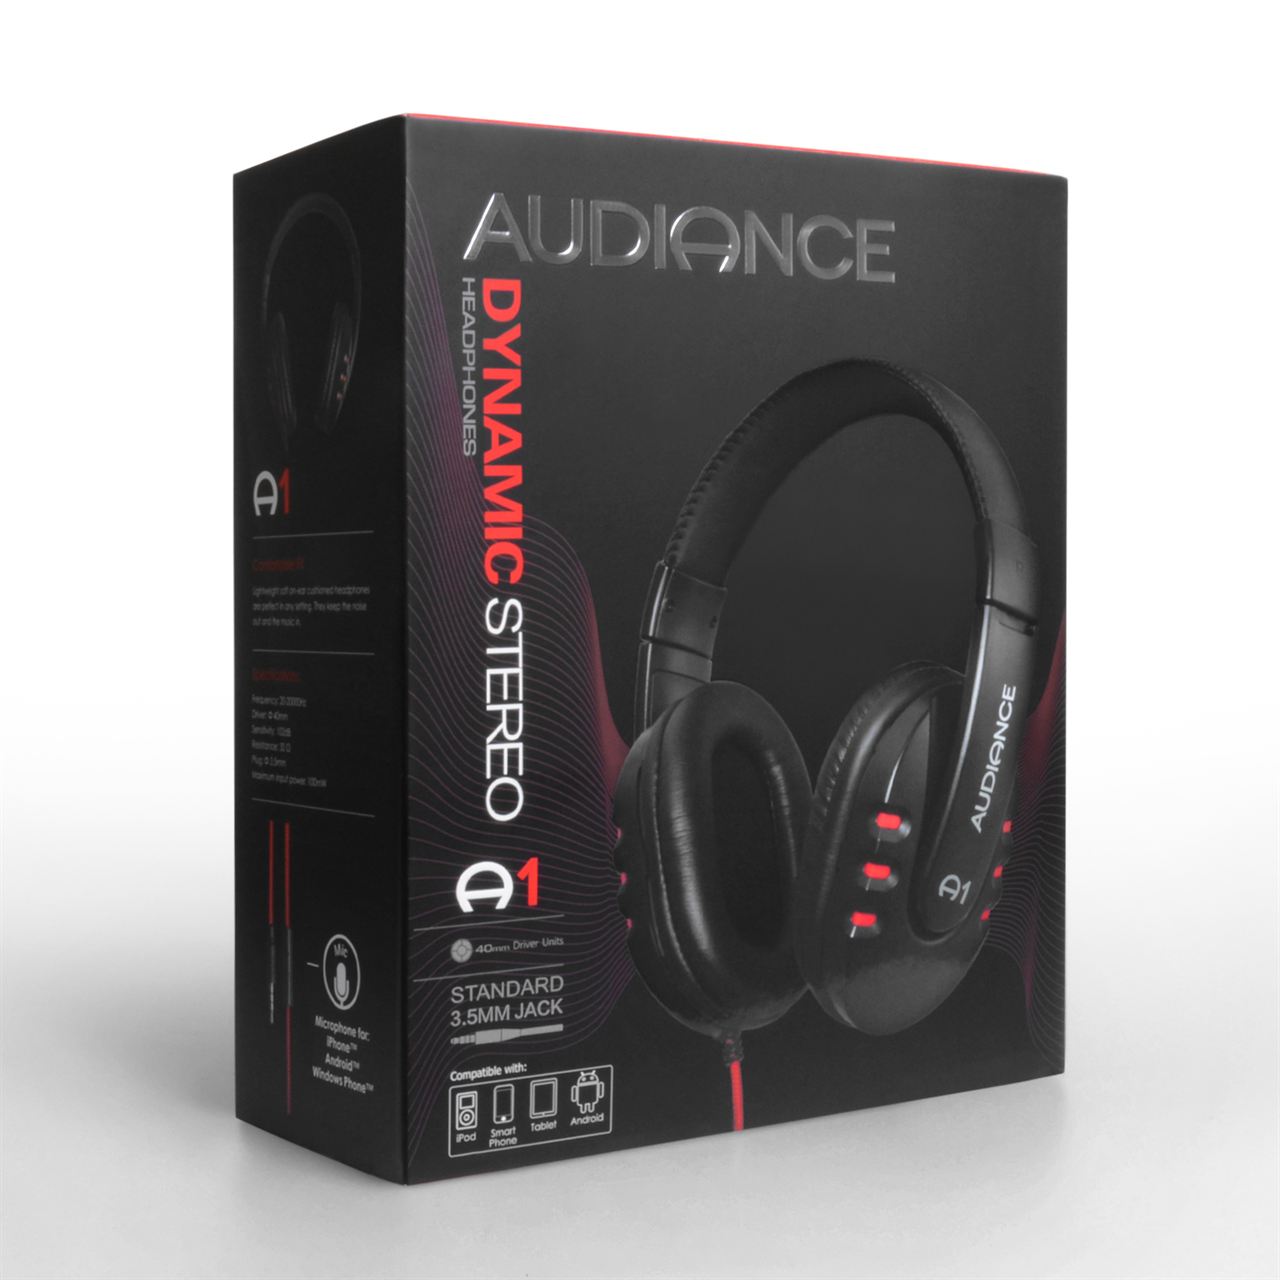 Audiance A1 Over Ear Headphones - Black/Red